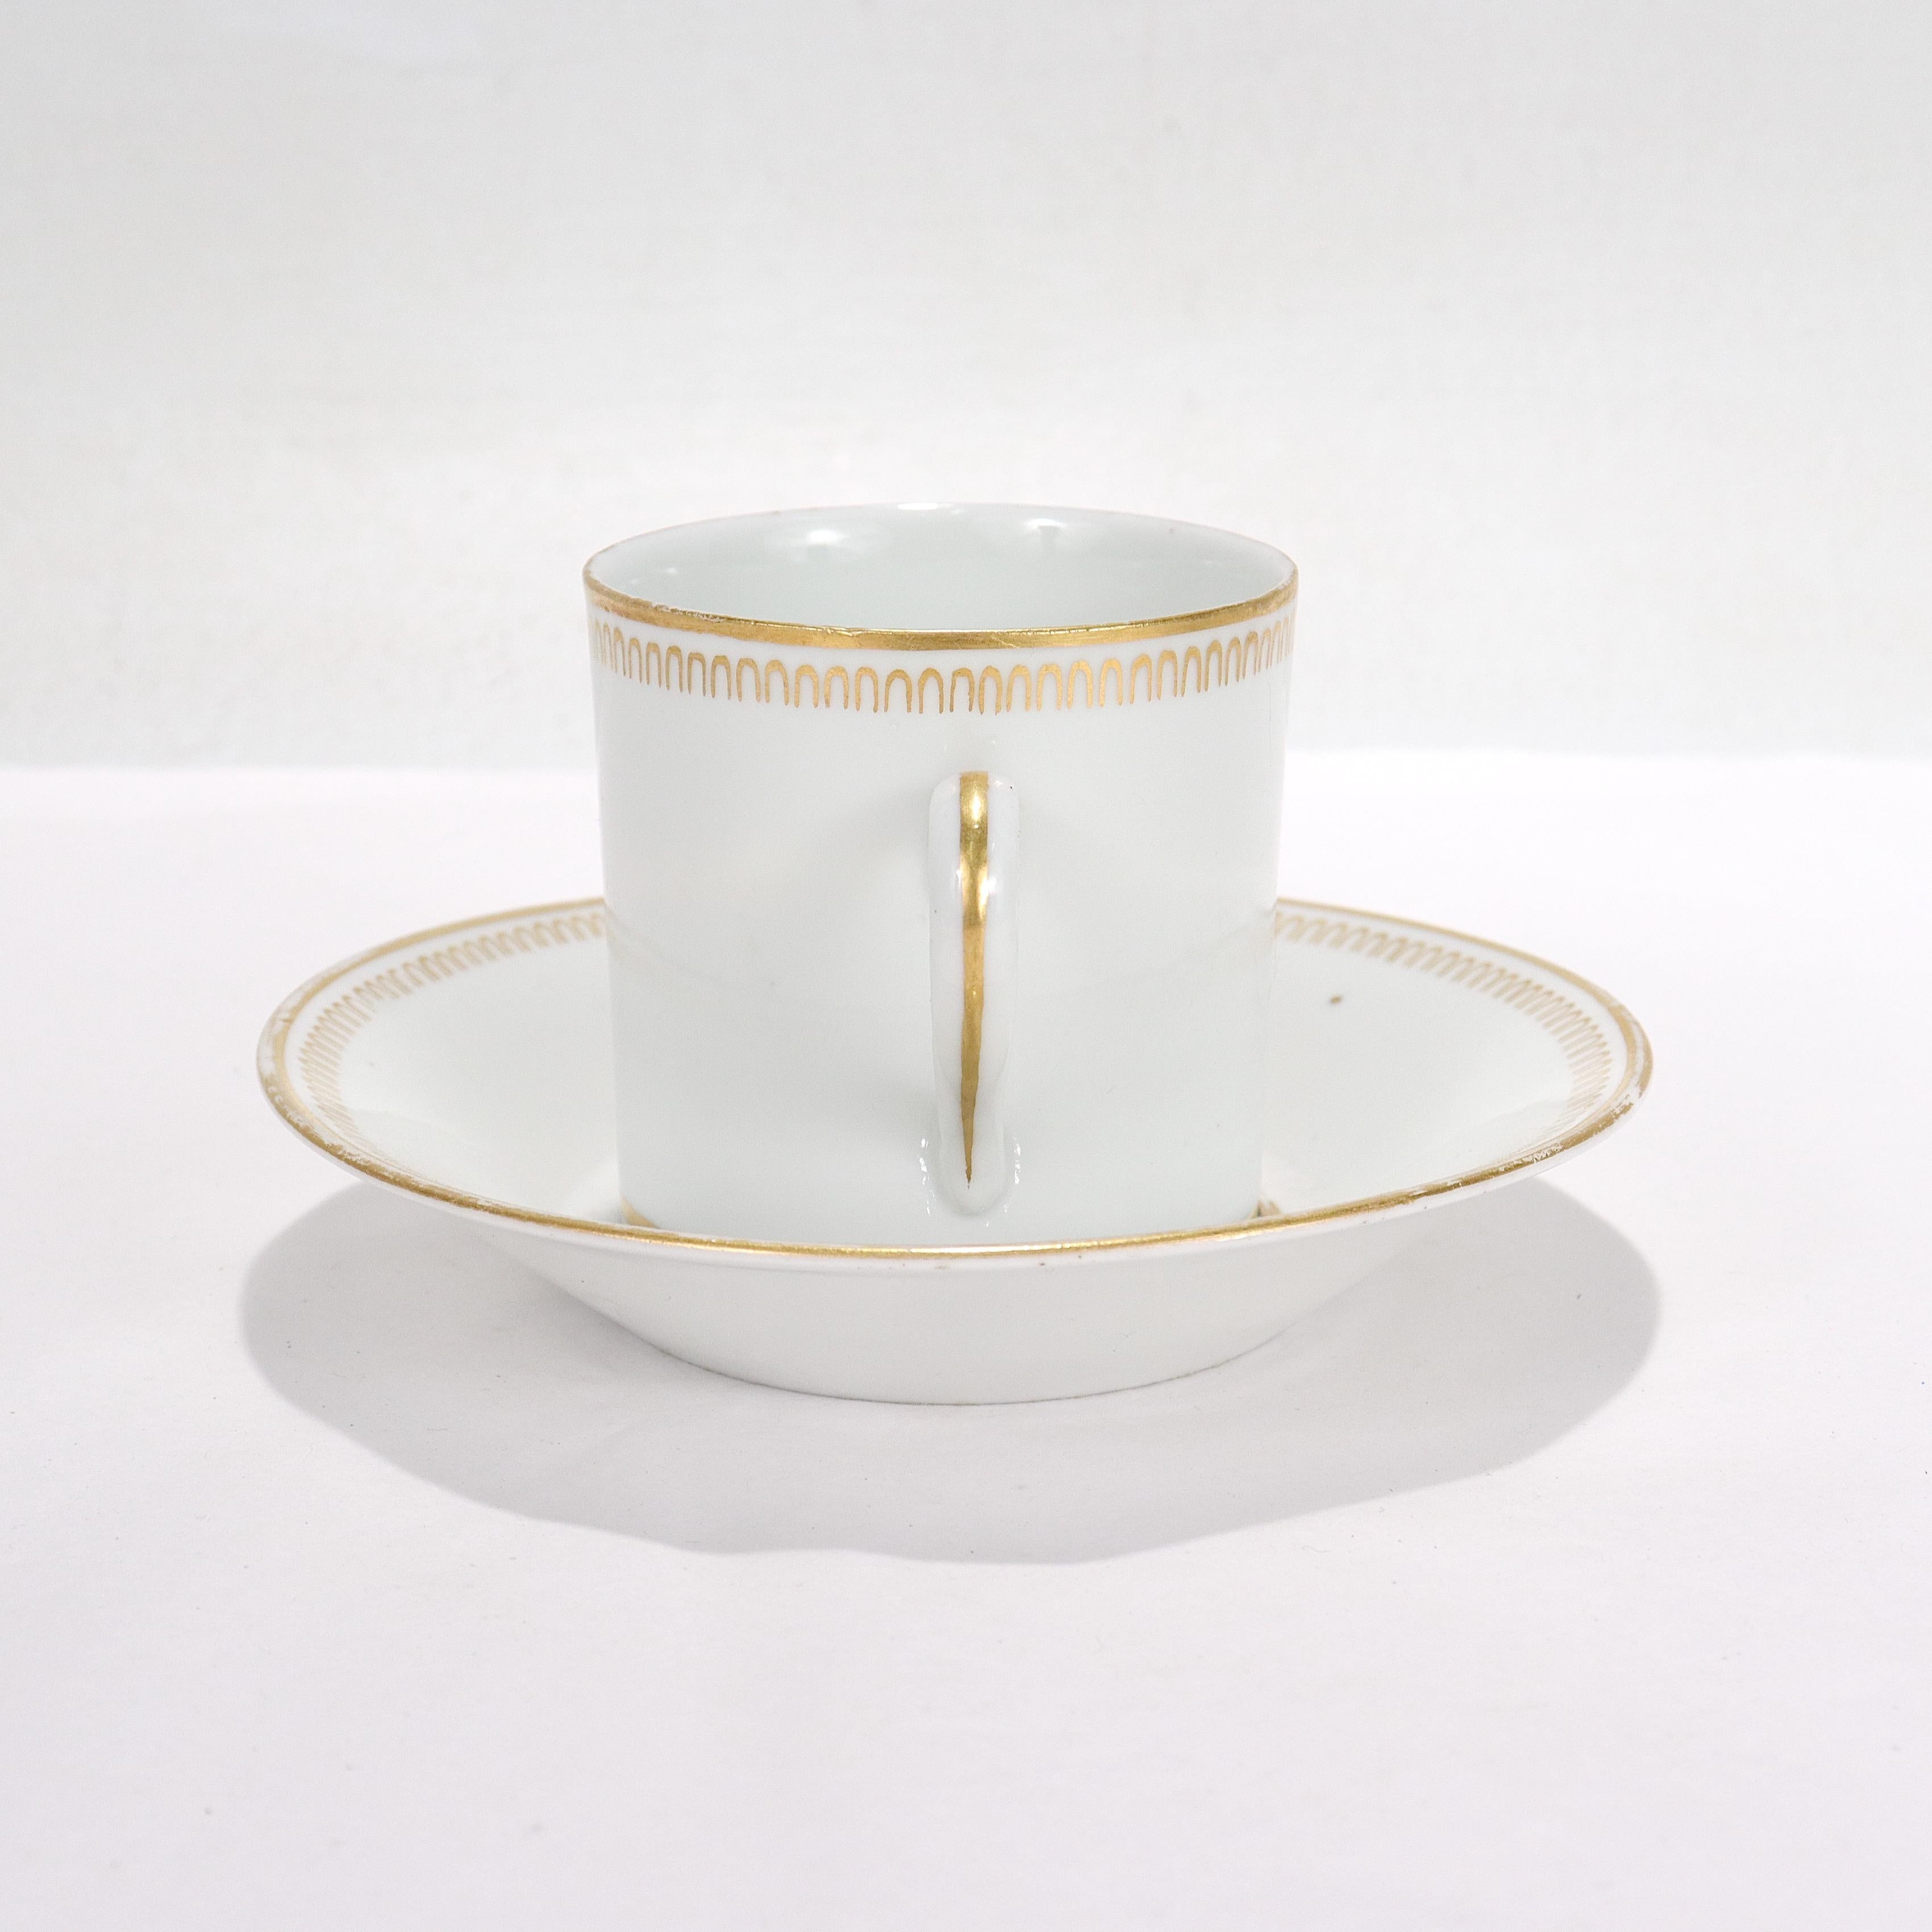 Antique Italian Doccia Topographical Porcelain Neoclassical Cup and Saucer In Good Condition For Sale In Philadelphia, PA